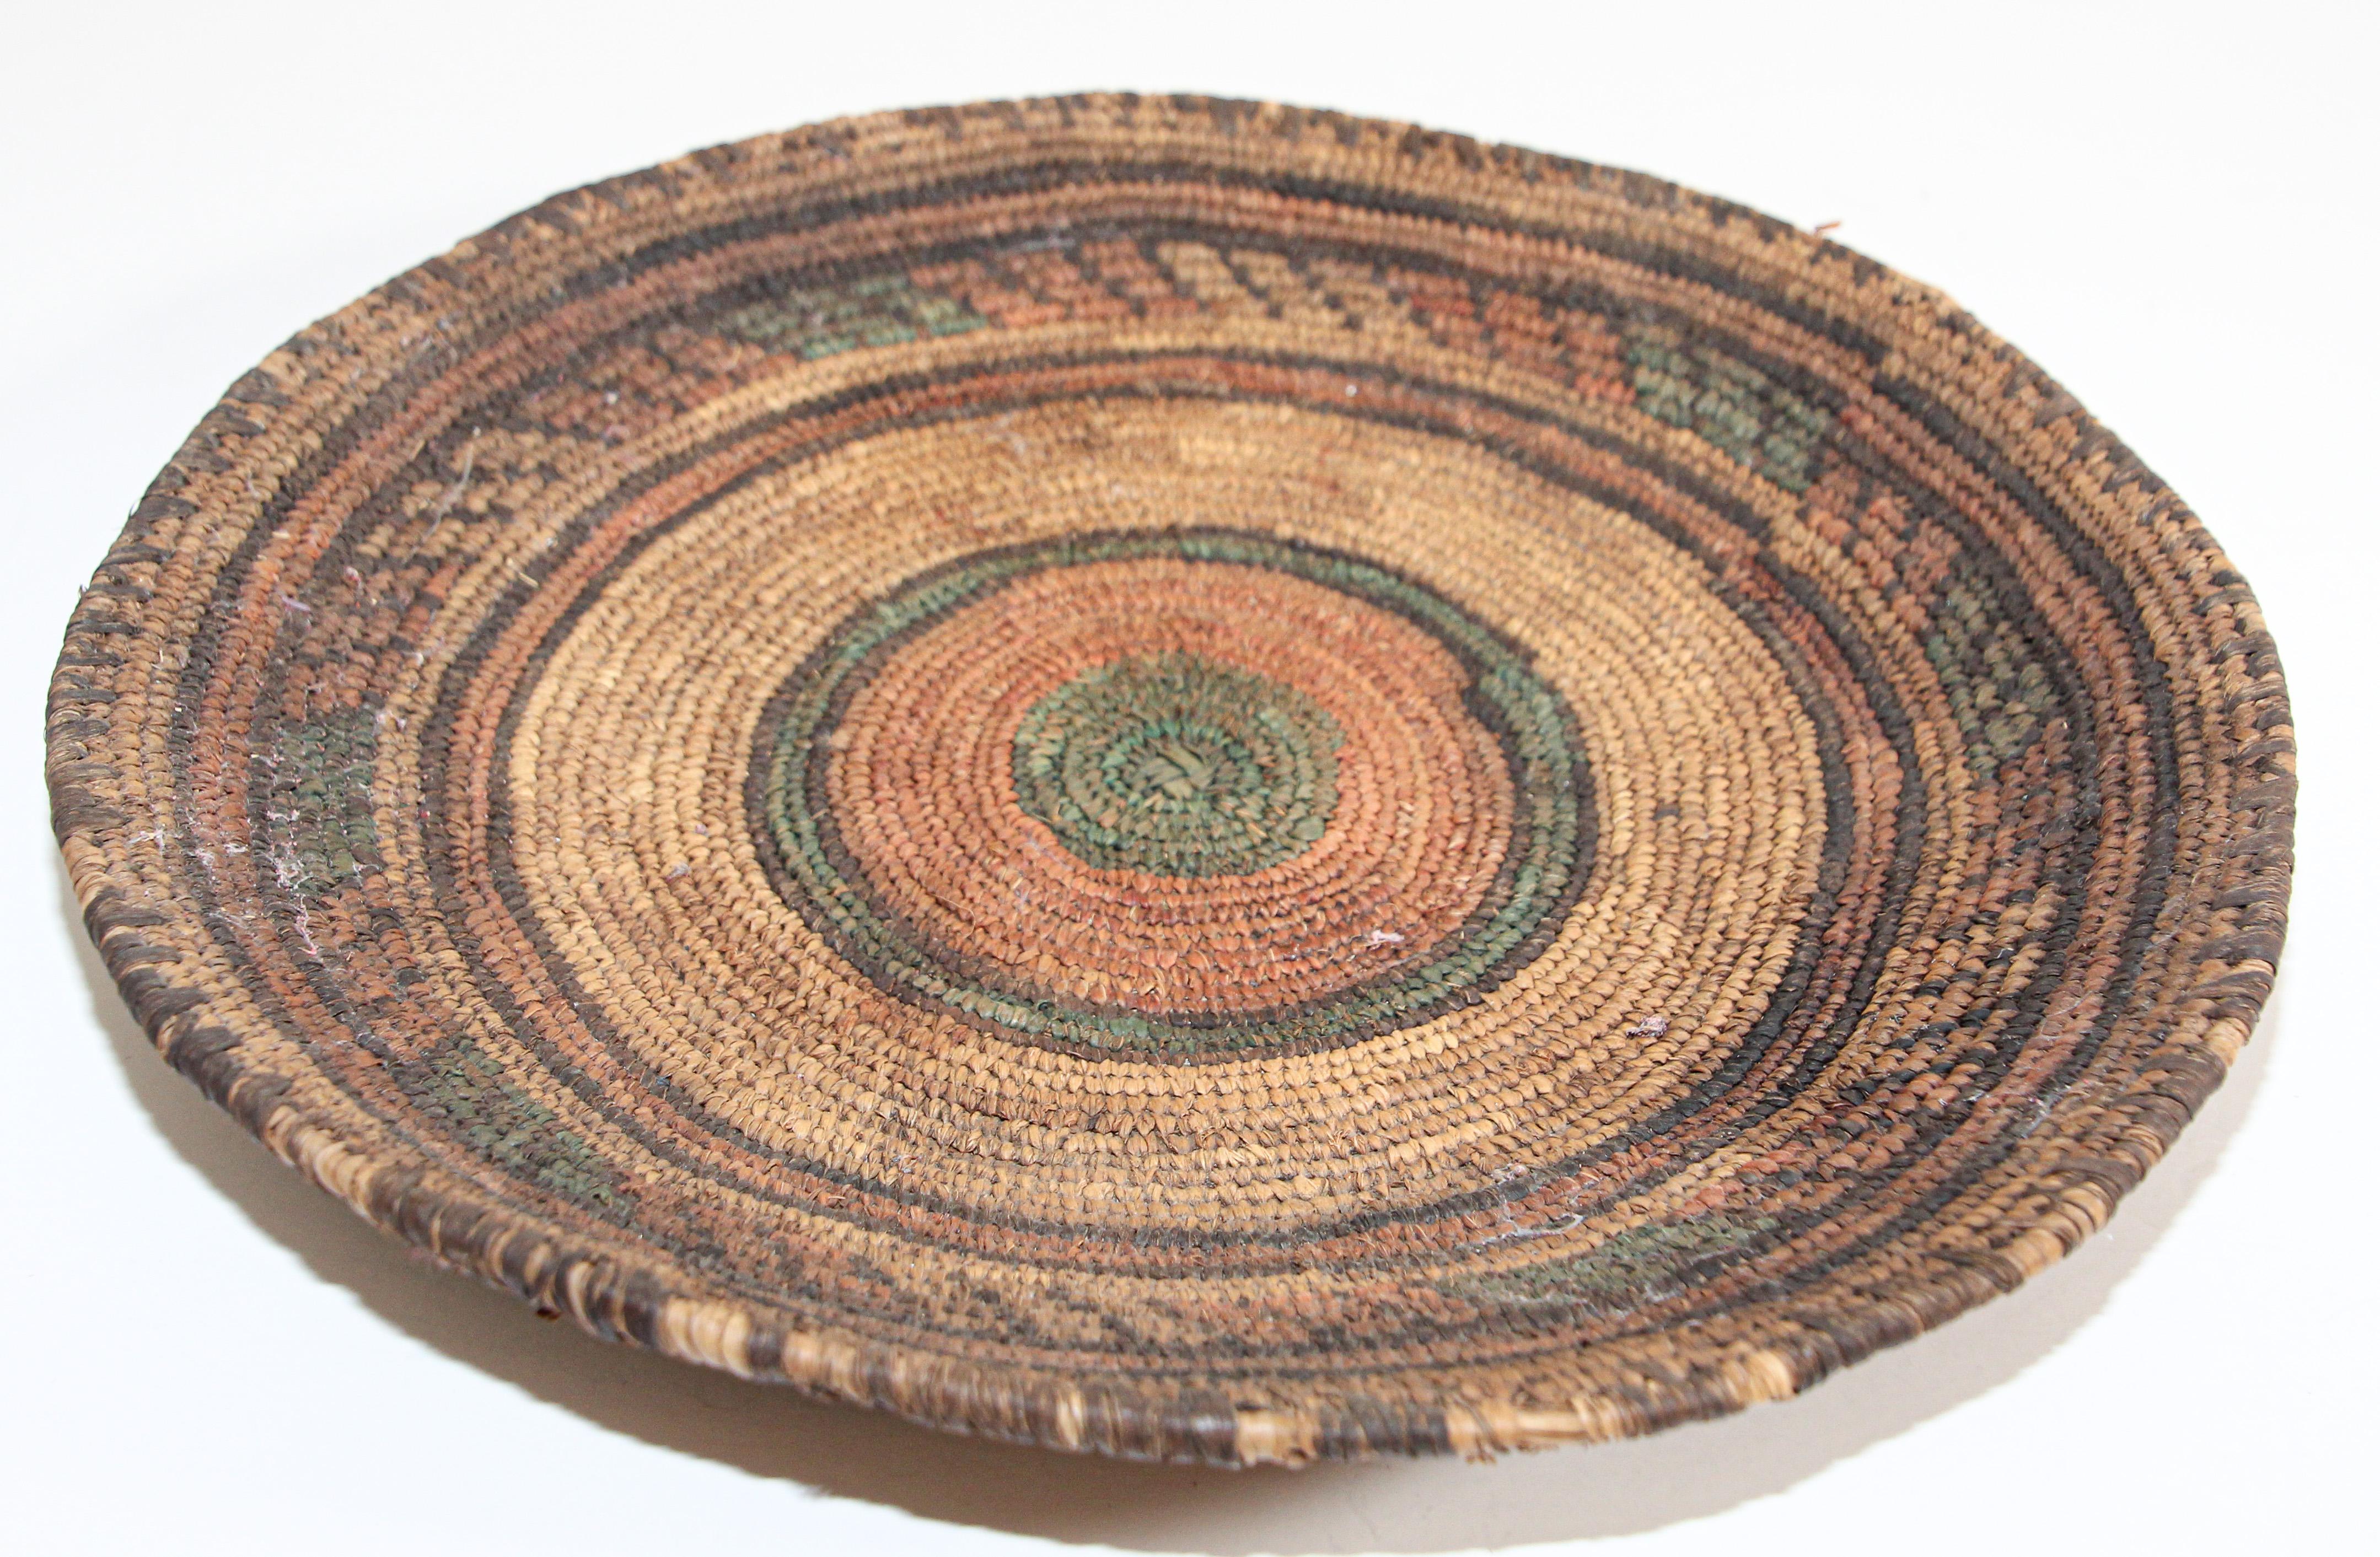 Vintage Tribal handwoven seagrass ethnic round South African basket.
Beautiful old artisanal handwoven basket with tribal designs and patterns all around.
Handwoven by women in Zambia.
Great patina from years of daily use to make each basket one